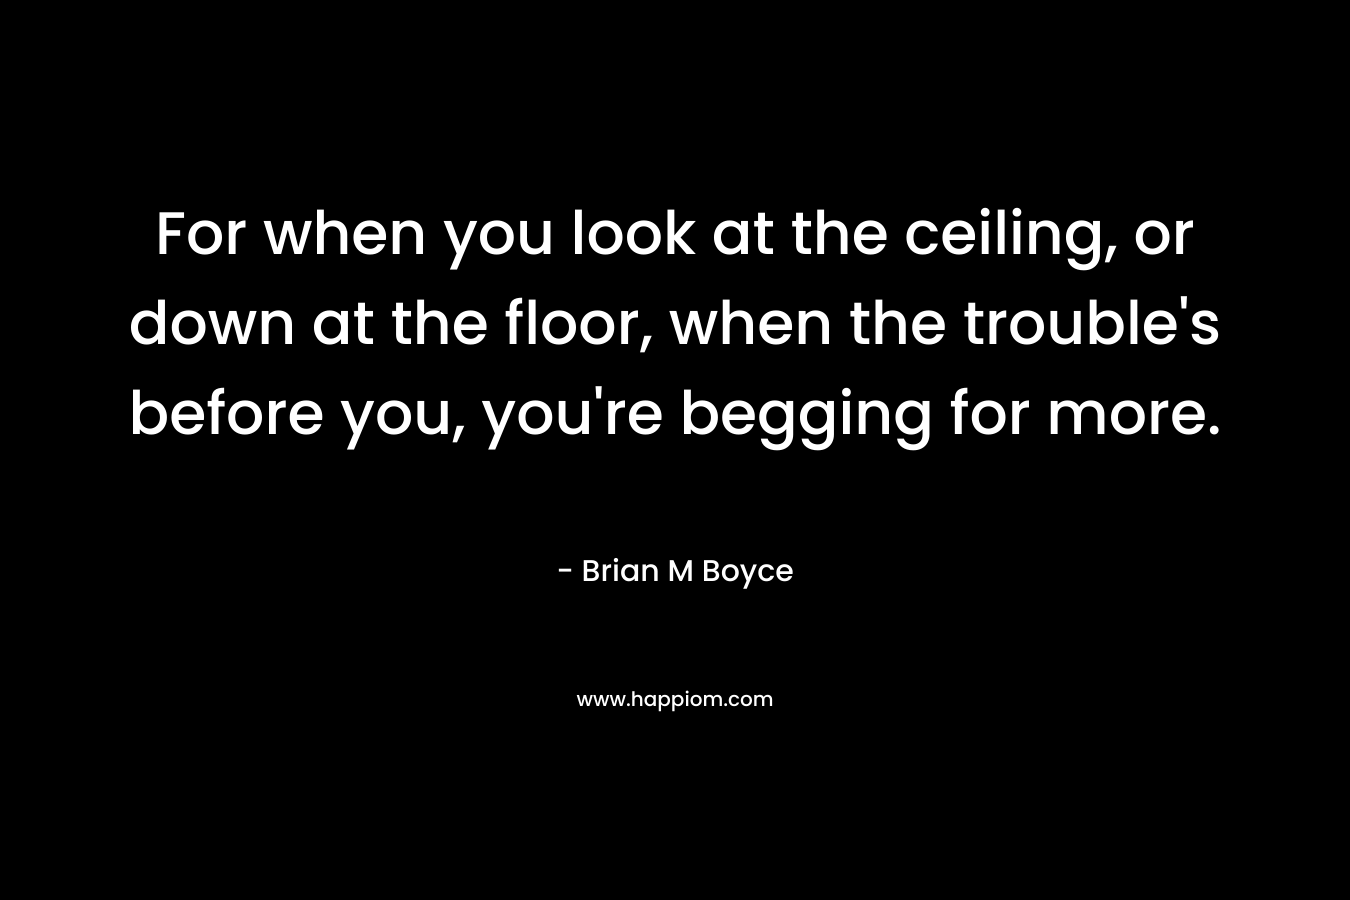 For when you look at the ceiling, or down at the floor, when the trouble’s before you, you’re begging for more. – Brian M Boyce